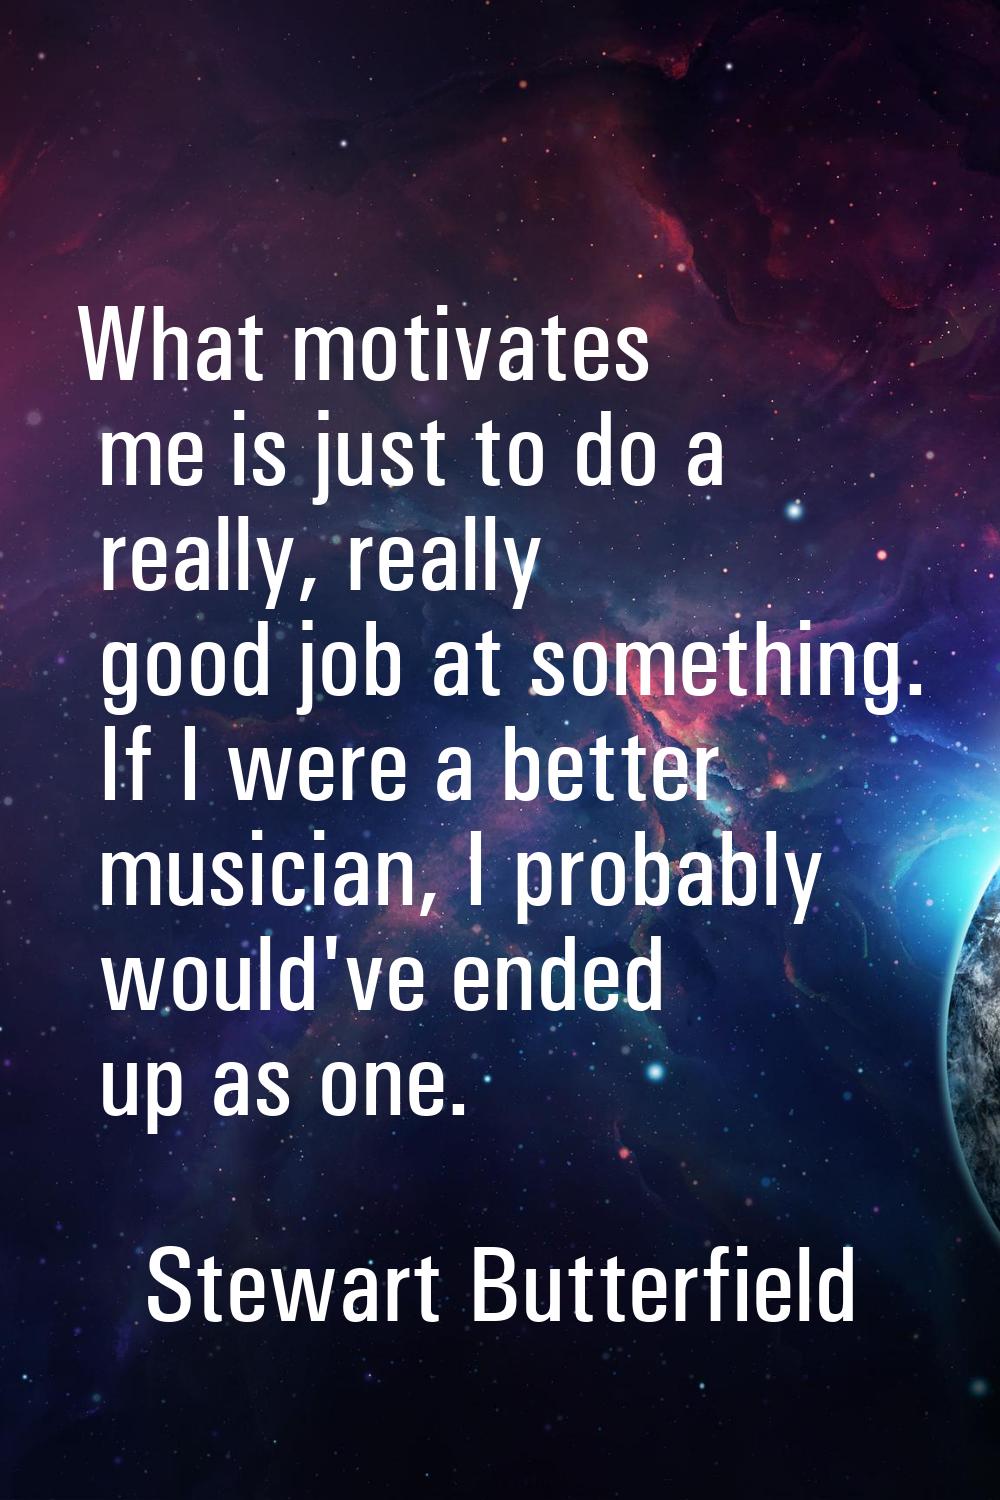 What motivates me is just to do a really, really good job at something. If I were a better musician